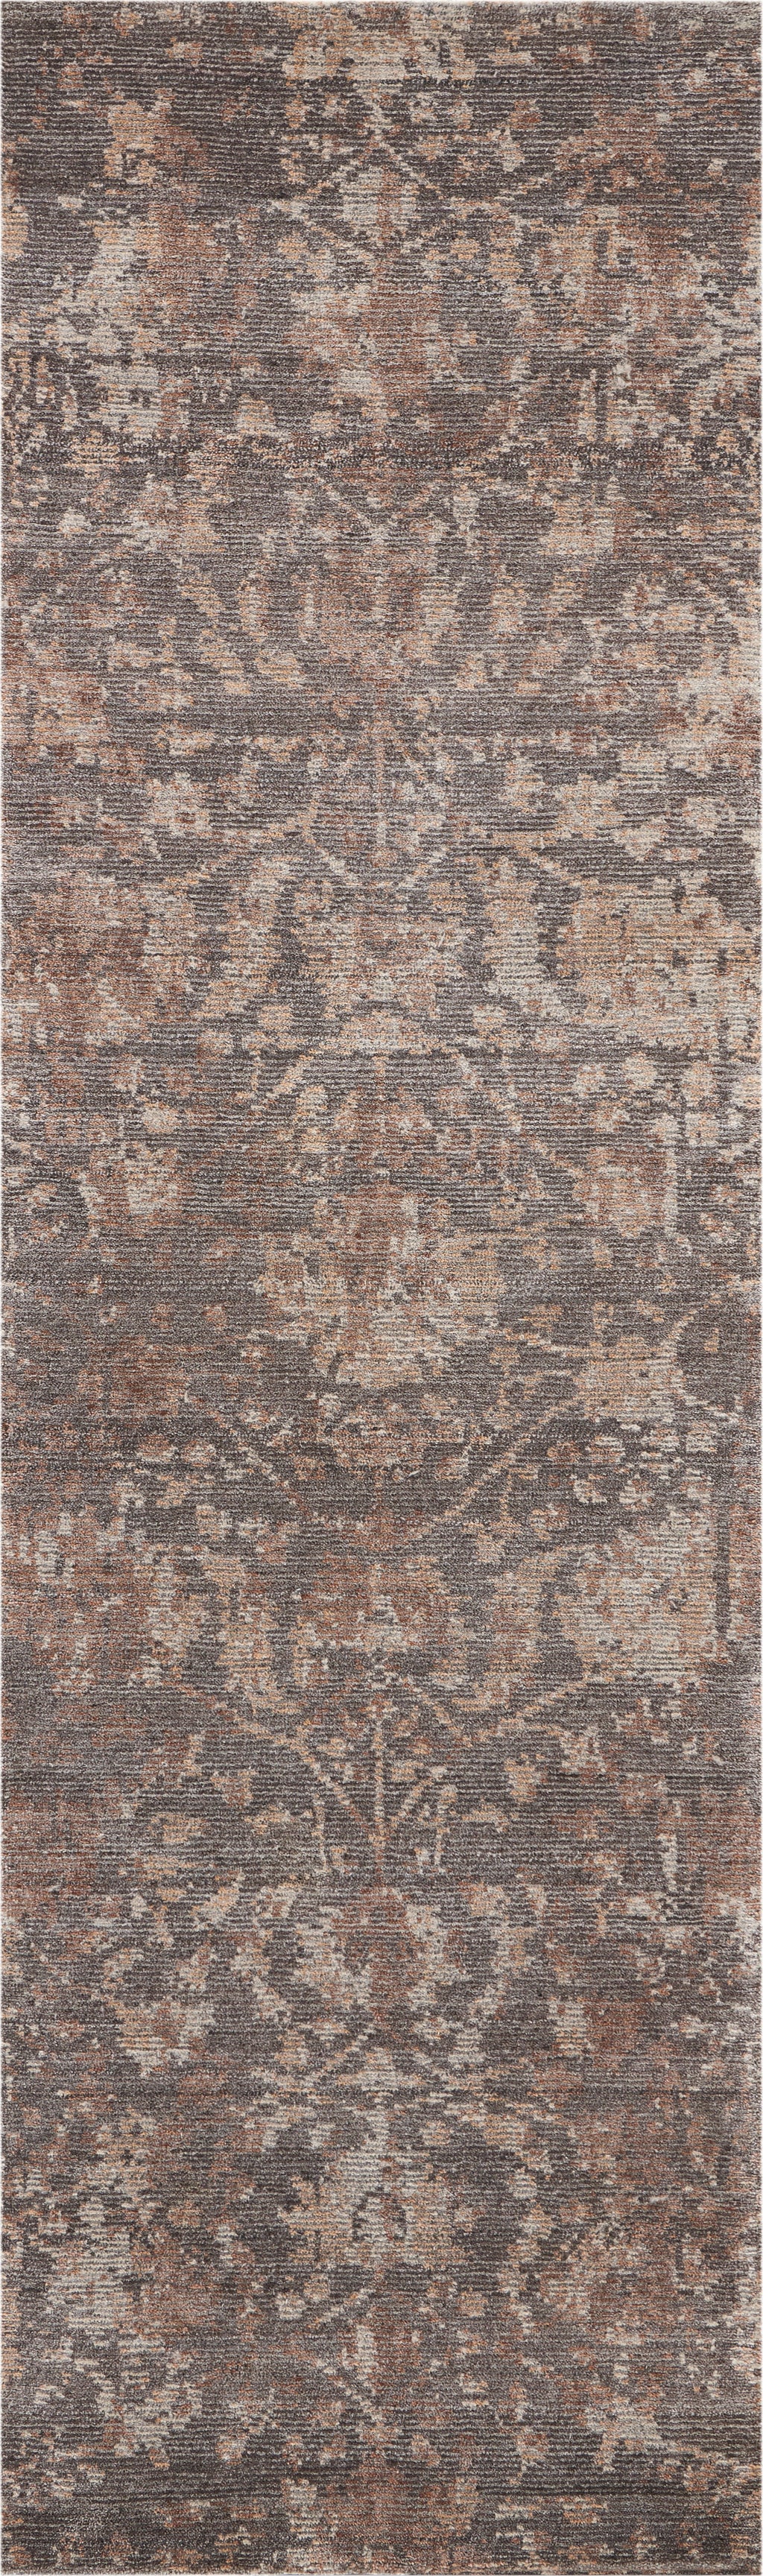 Muted, antique-style area rug with intricate floral and ornamental motifs.